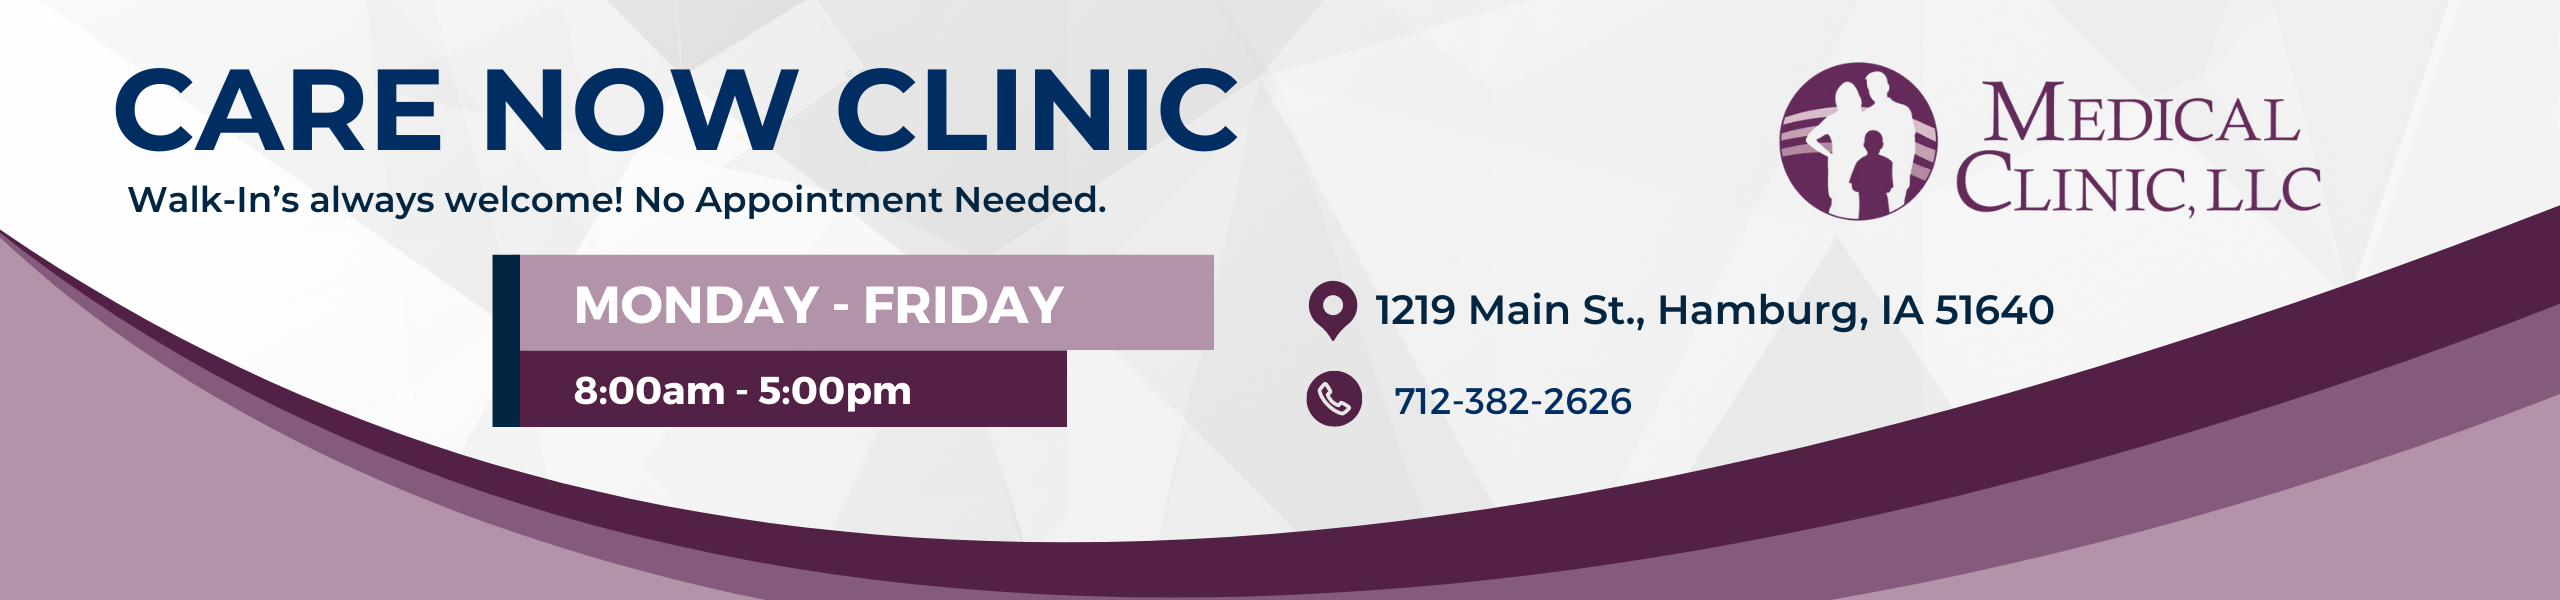 Care Now Clinic 
Walk-Ins Welcome! No appointment needed. 
Monday - Friday 
8am-5pm
712-382-2626
1219 Main St. Hamburg, IA 51640